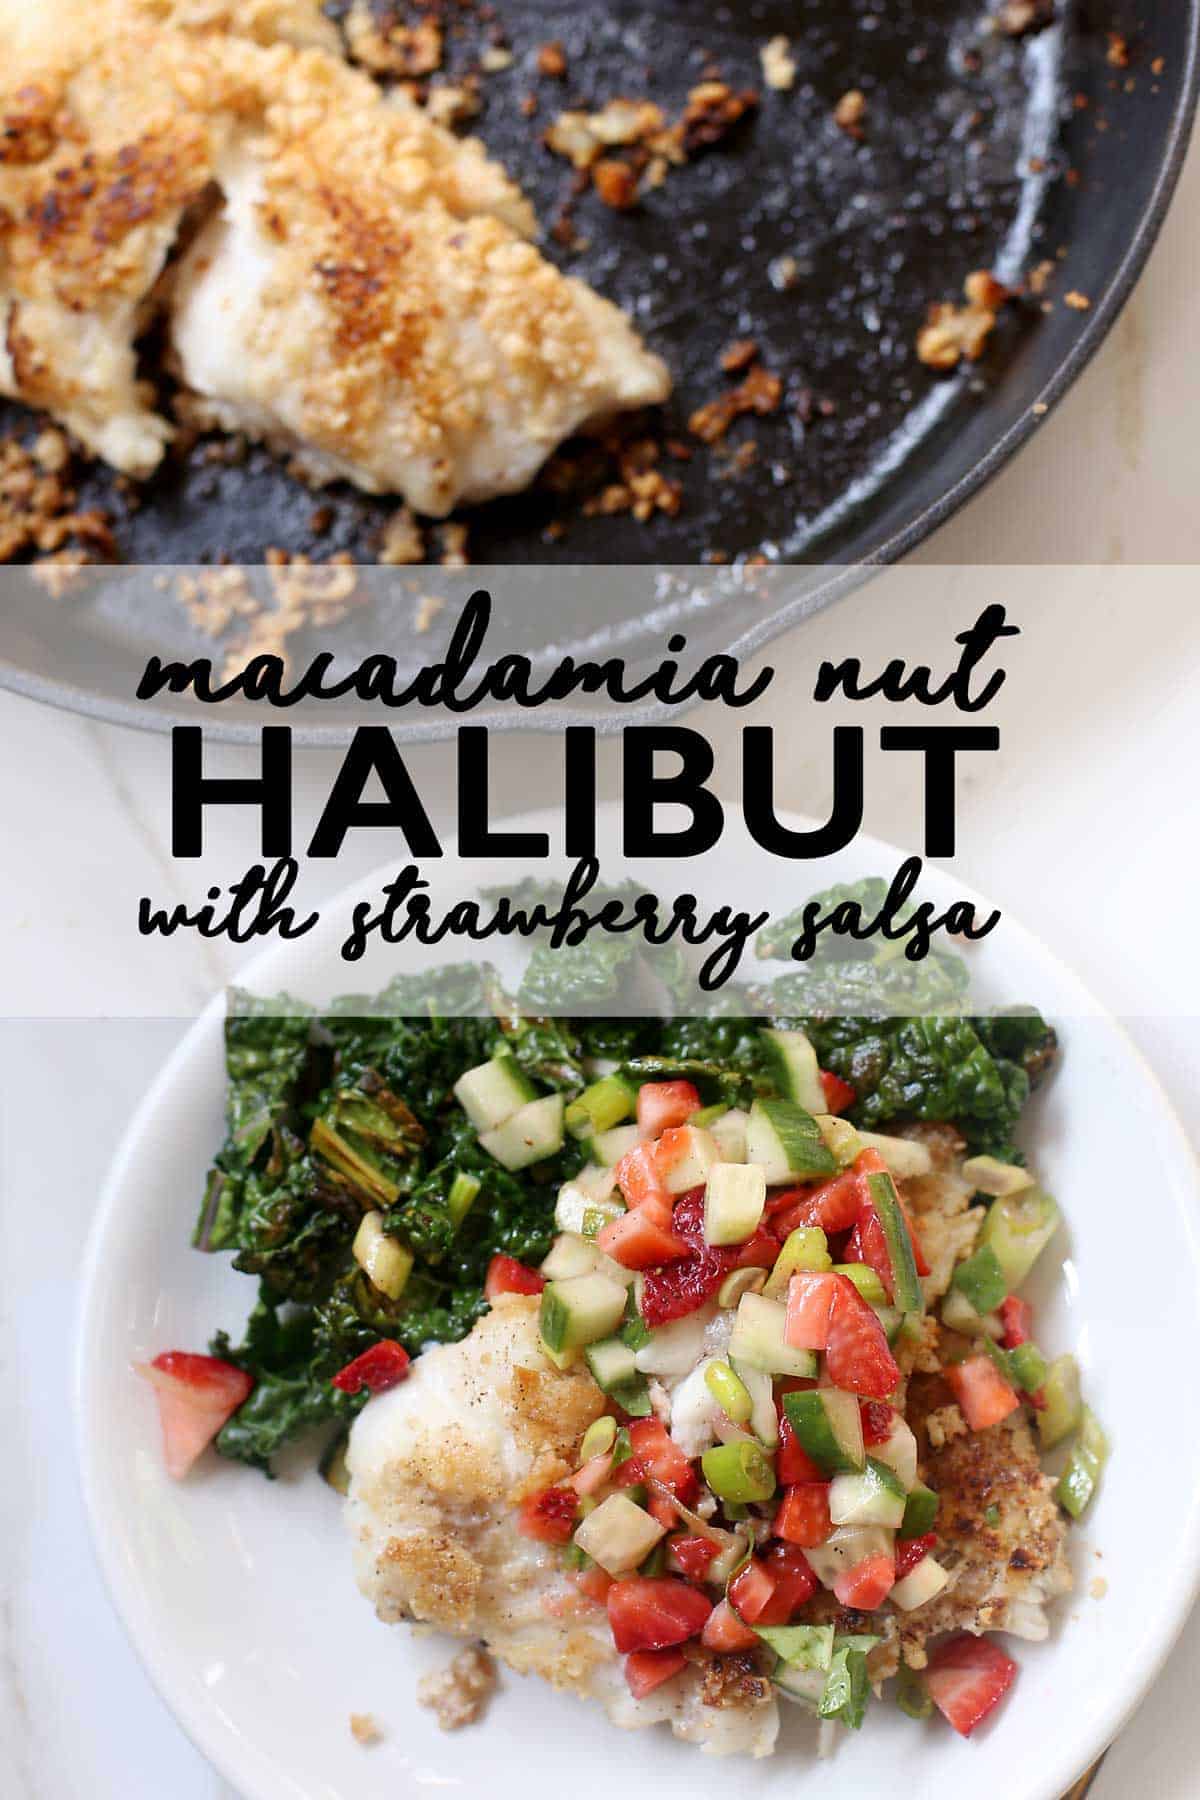 Macadamia Crusted Halibut with Strawberry Salsa is an amazing halibut recipe to cook when looking for a dairy free, healthy dinner recipe for Valentine's Day or any other weeknight dinner. halibut recipe | nut crusted fish | macadamia crusted halibut